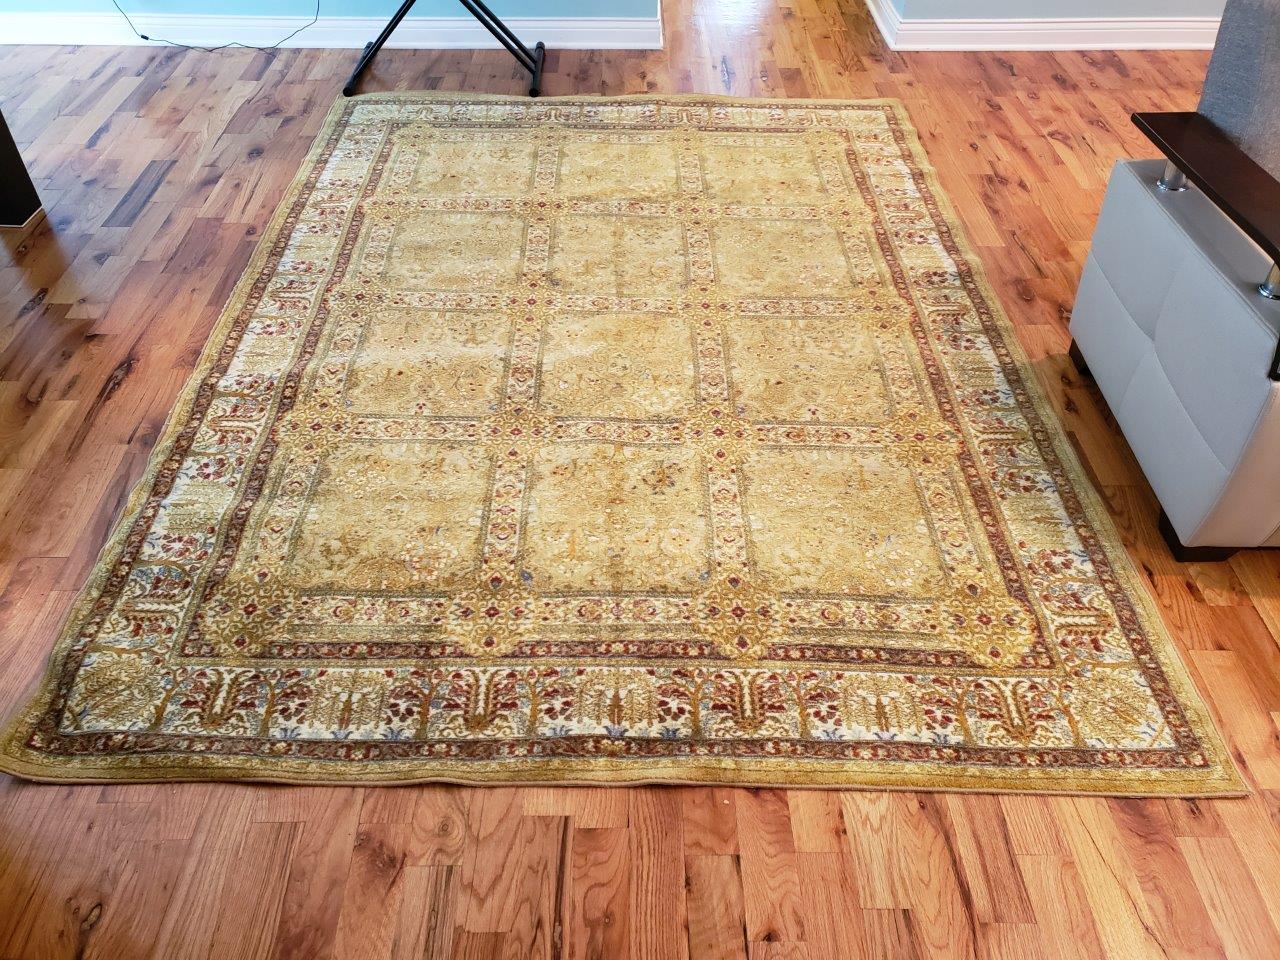 Medall Panel Rug 7 X 9 Ft Antiquities, Area Rugs 7 X 9